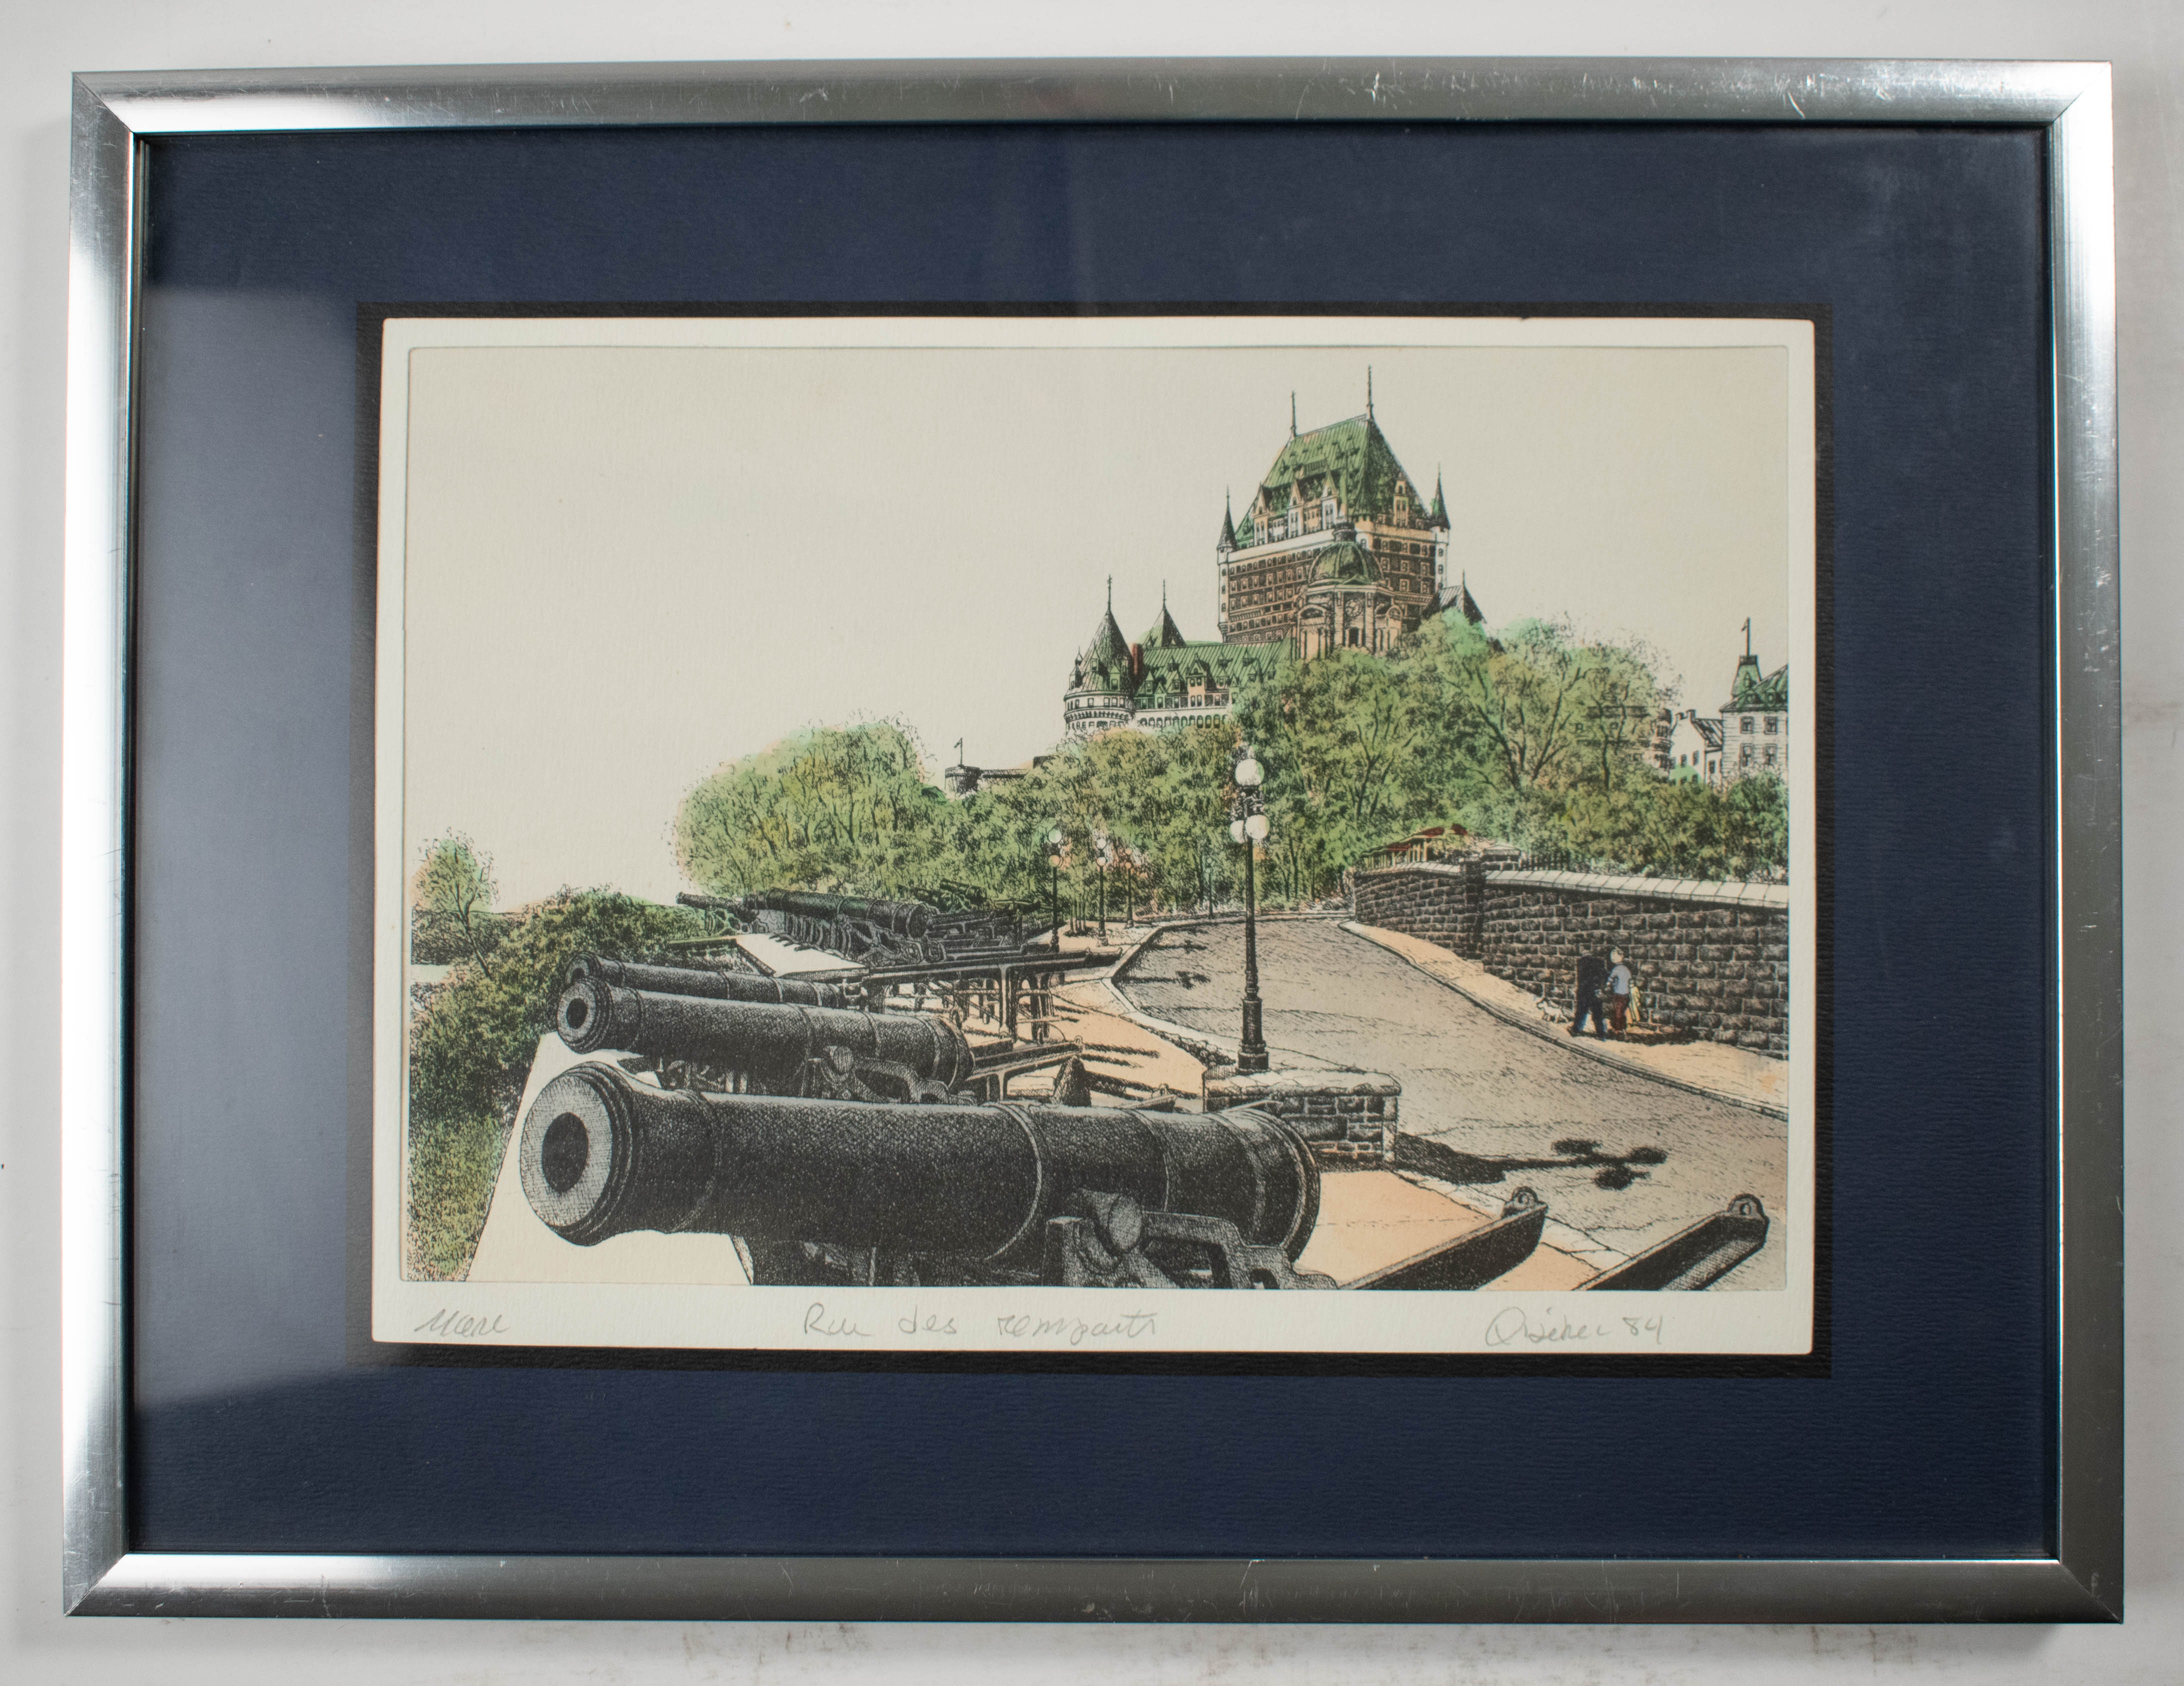 Alain Couture Hand Coloured Etching of the Remparts in Quebec Canada Framed